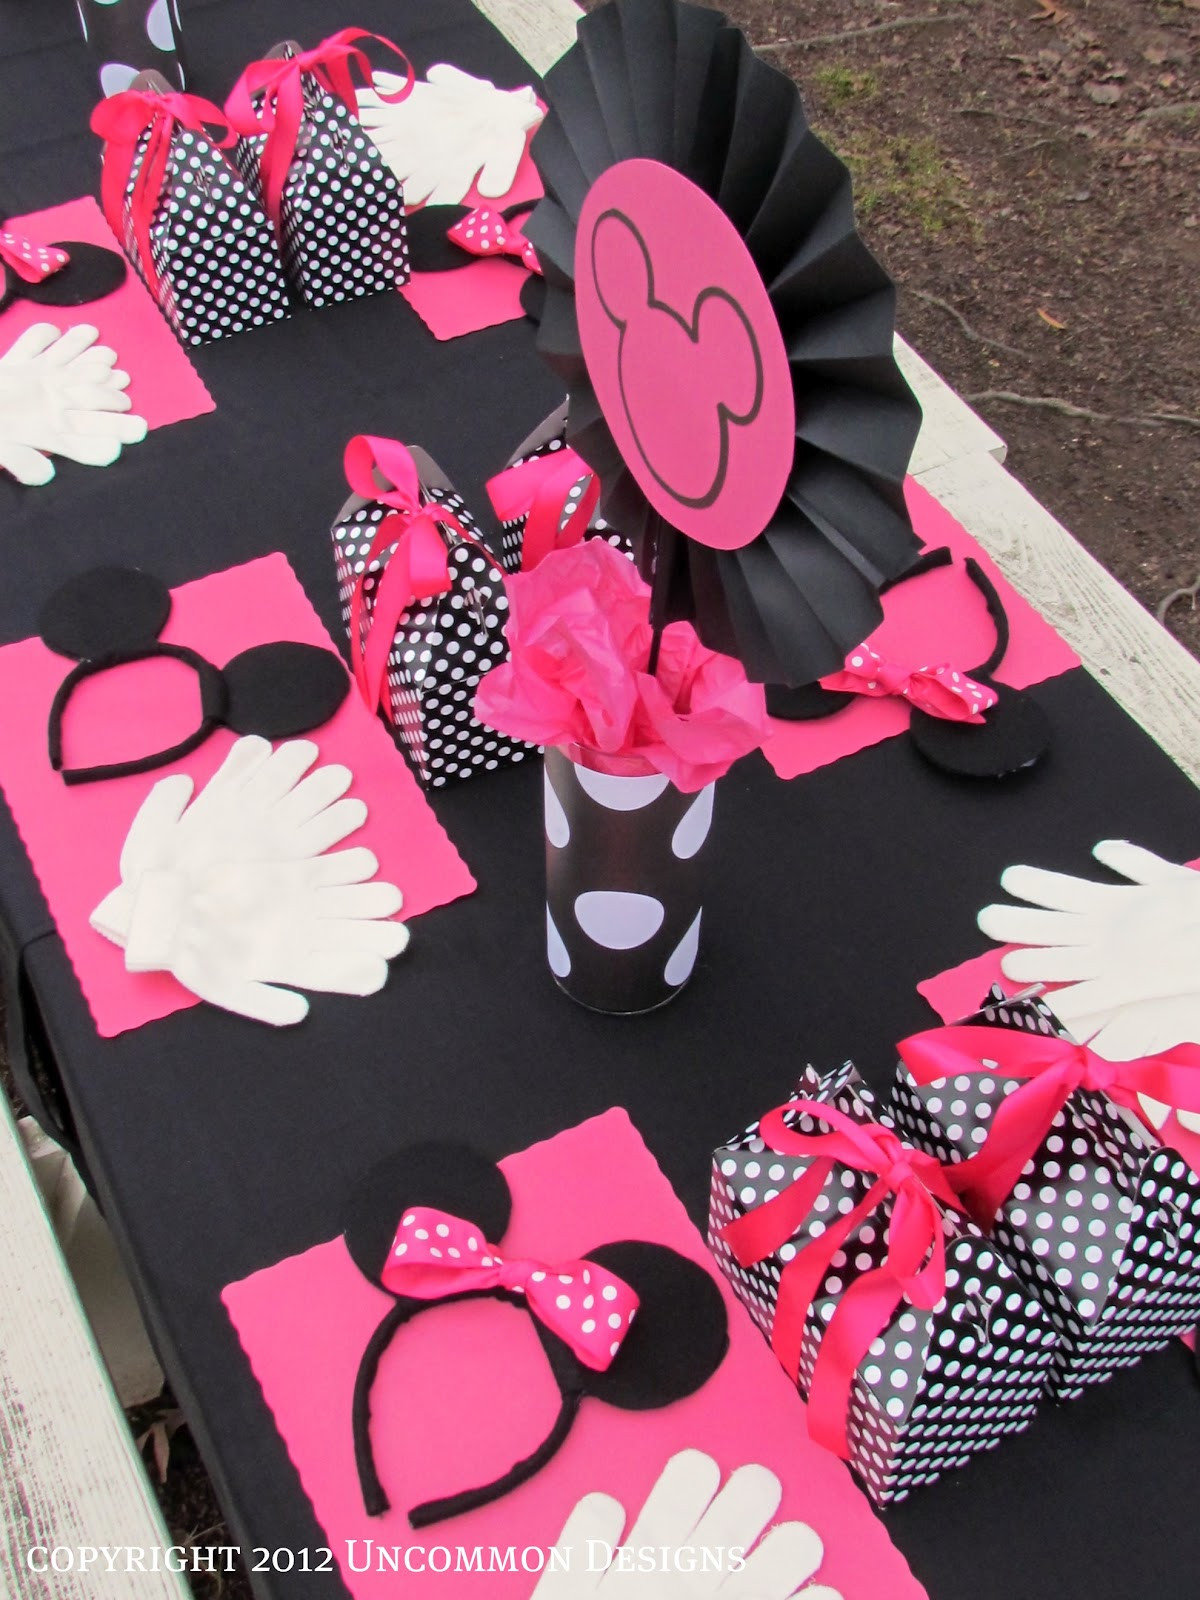 Diy Minnie Mouse Birthday Decorations
 A Minnie Mouse Birthday Party Un mon Designs